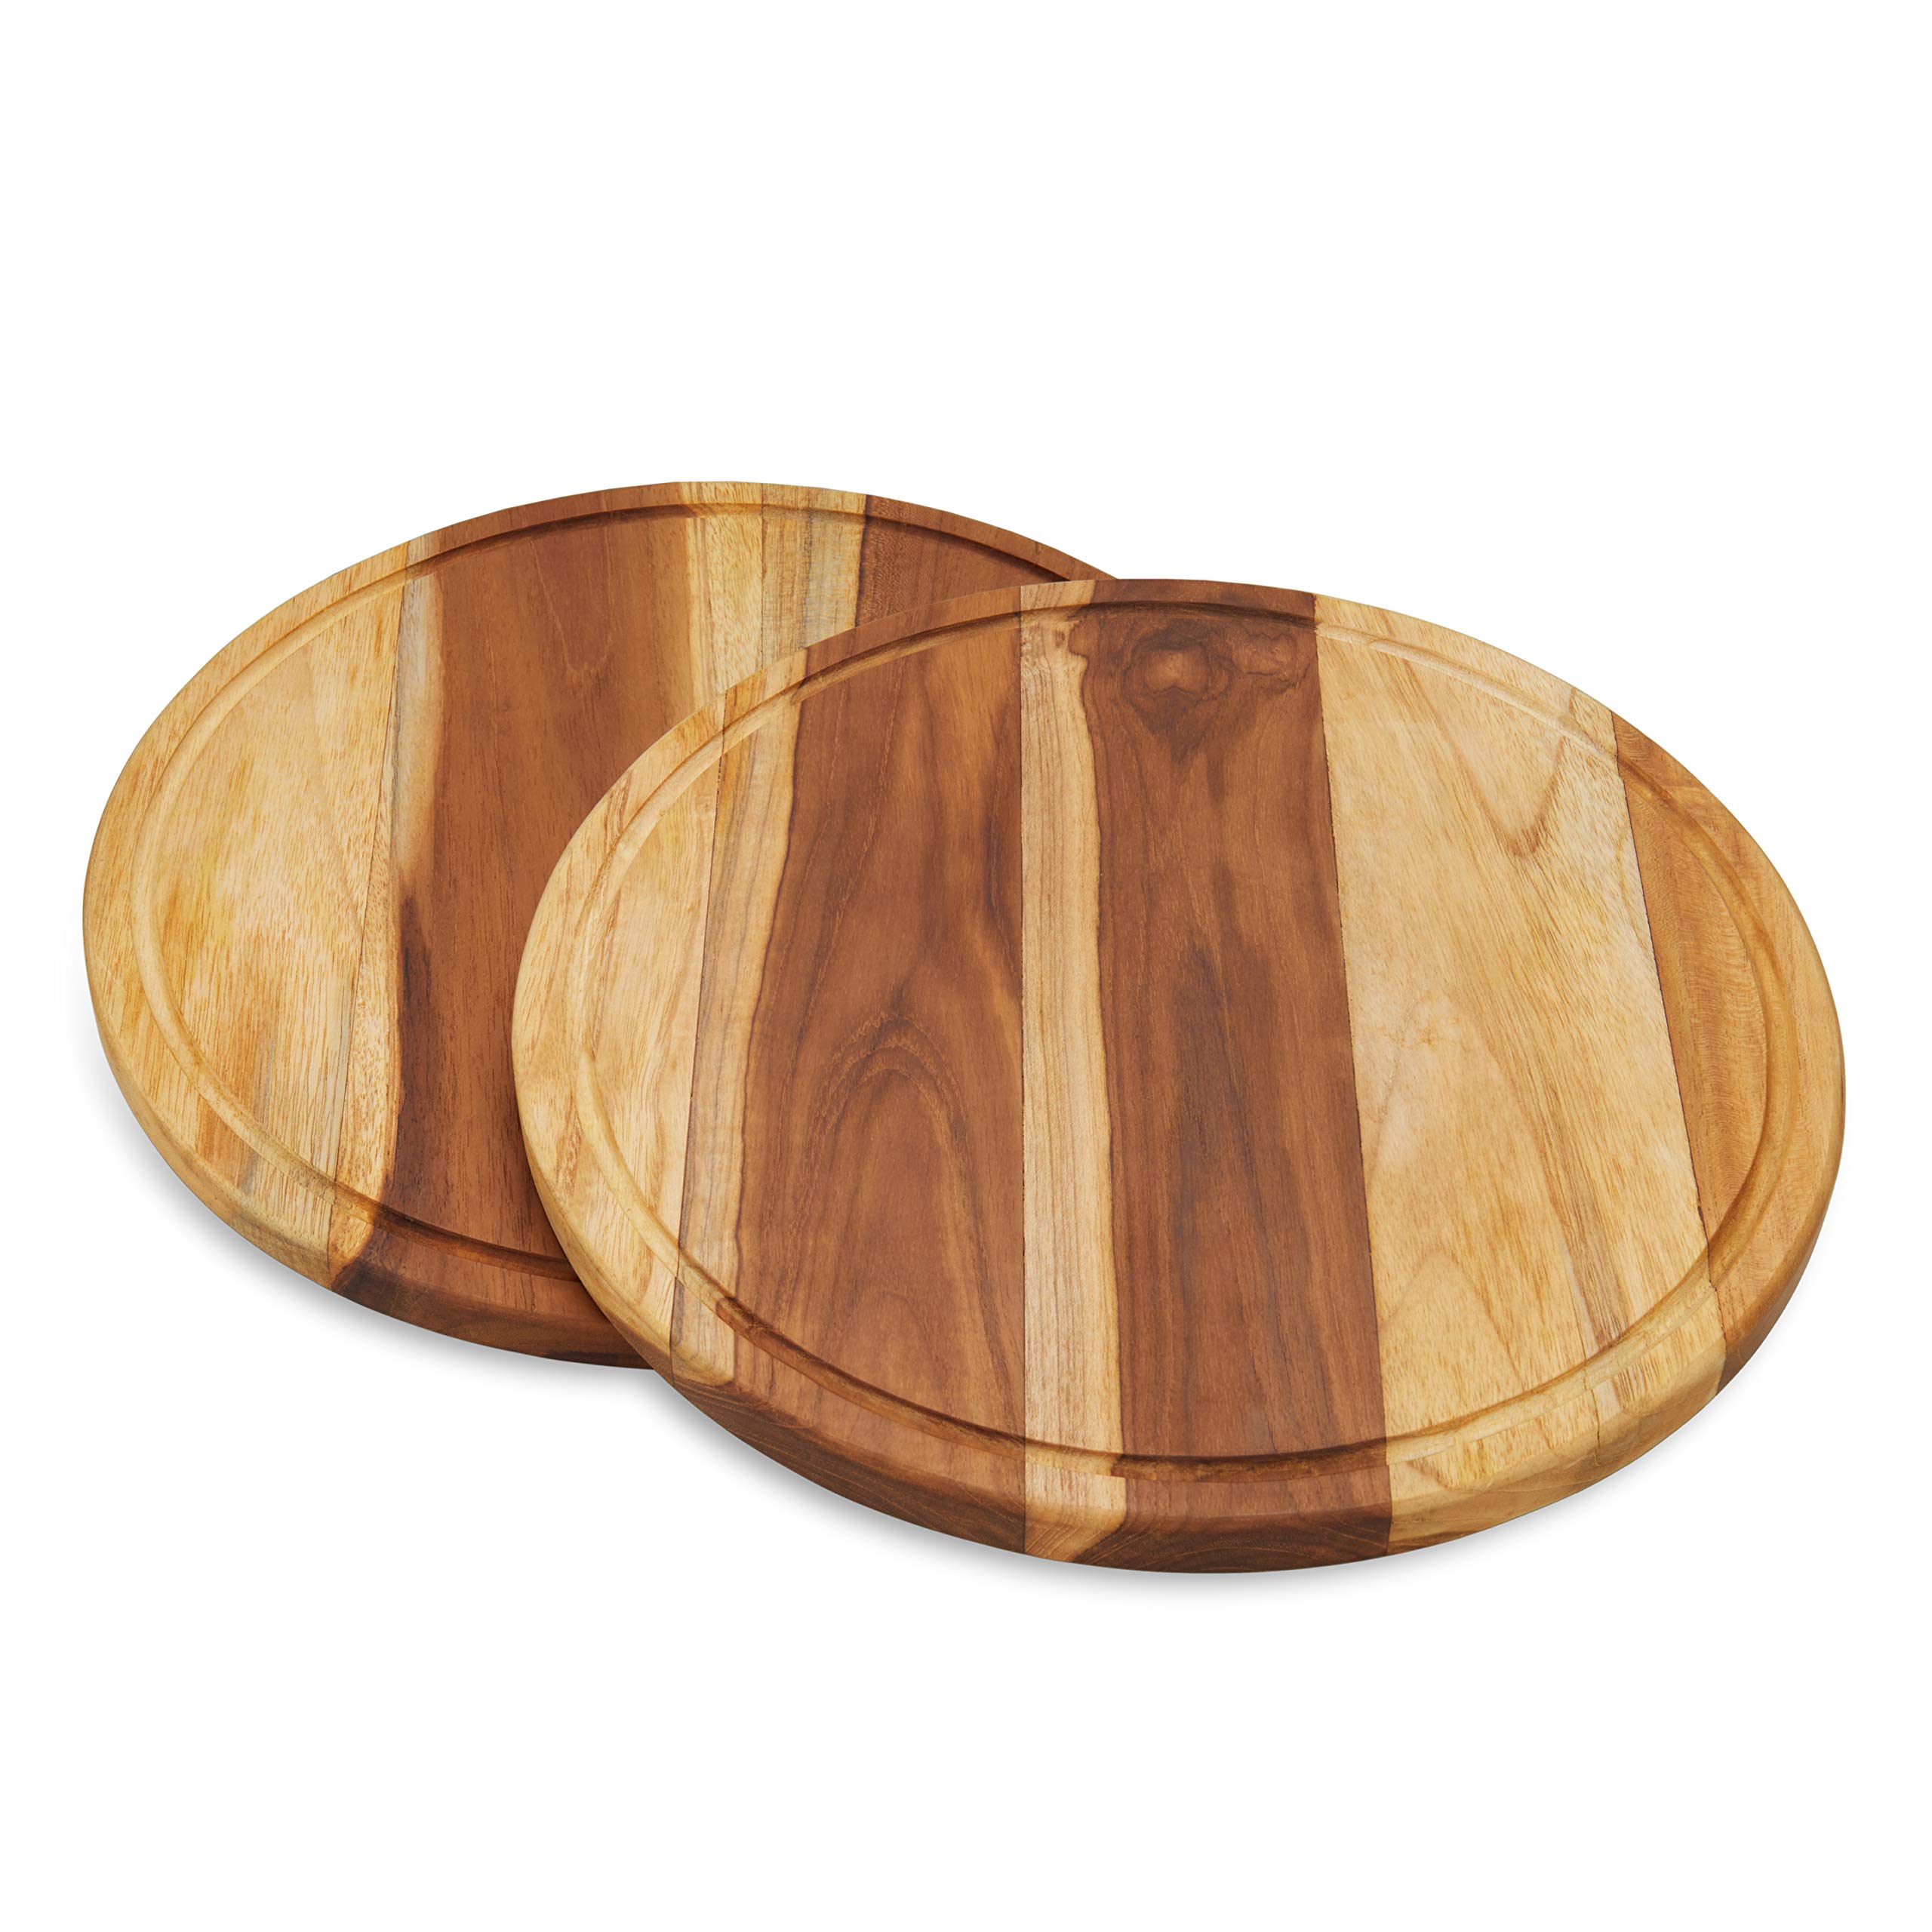 TeakCraft Teak Round Cutting Board With Juice Groove, Serving Tray, Set of 2 (13.5 x 13.5 x 0.75), FSC Certified Carving Board, The Bestla